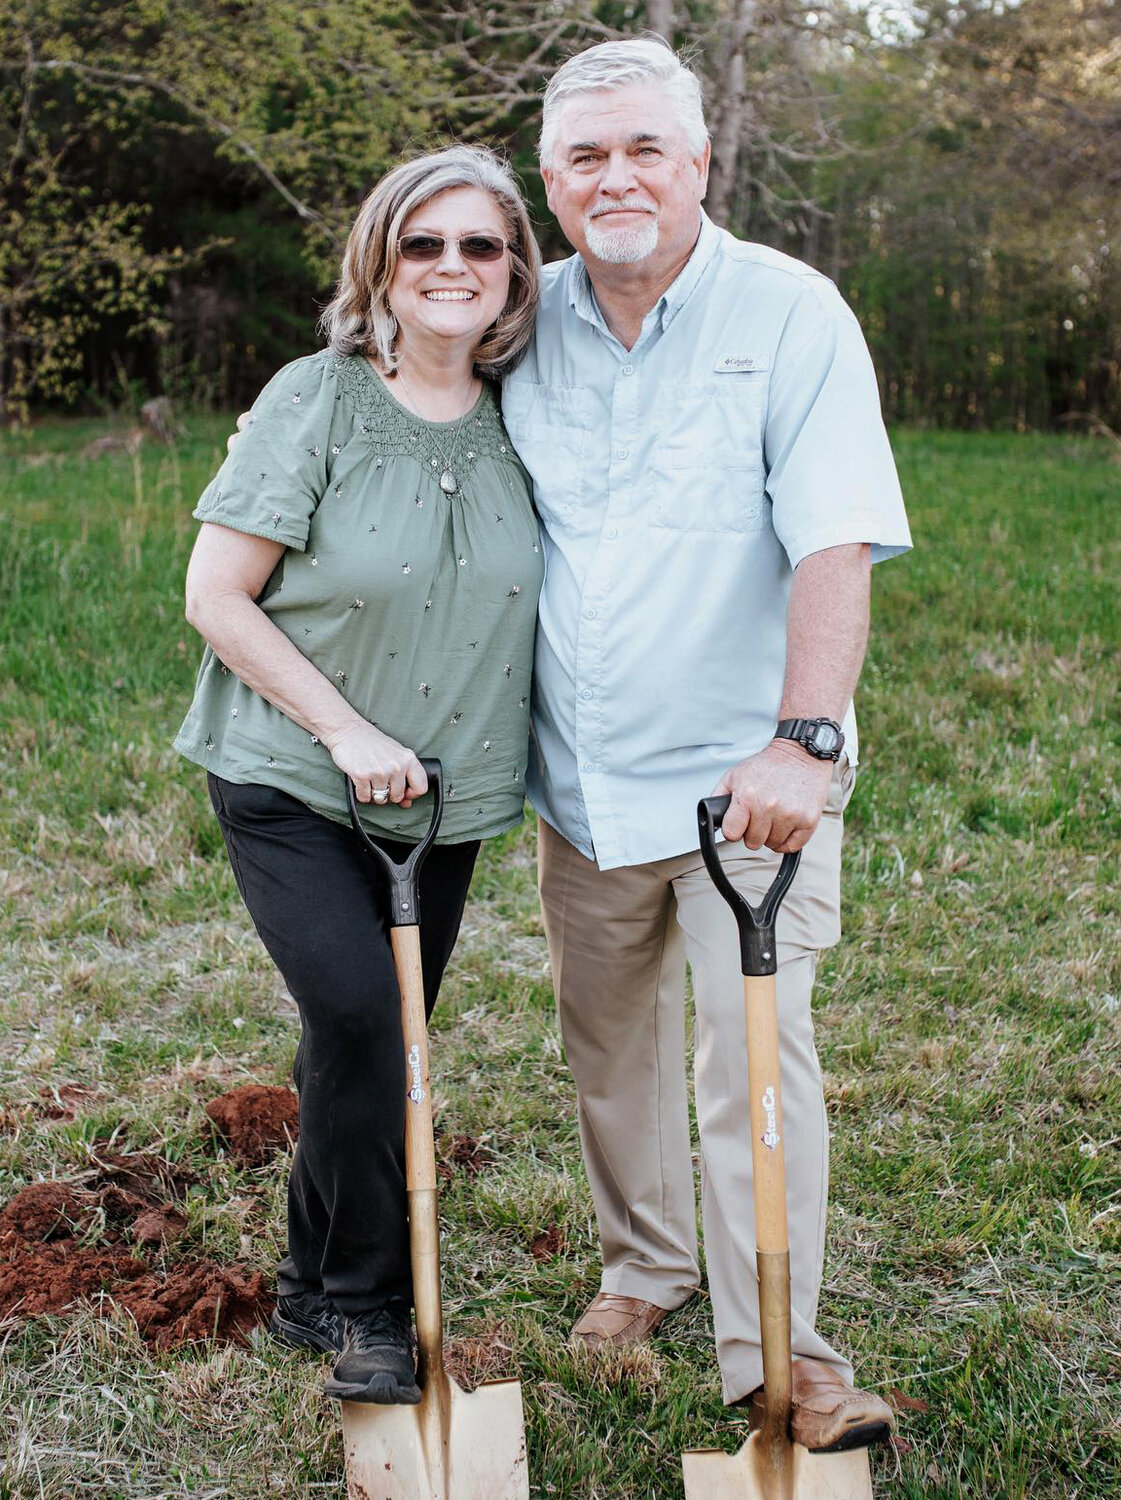 Mike and Angie Peavy participate in the groundbreaking ceremony for Gratis Church. (Photo/Gratis Church)